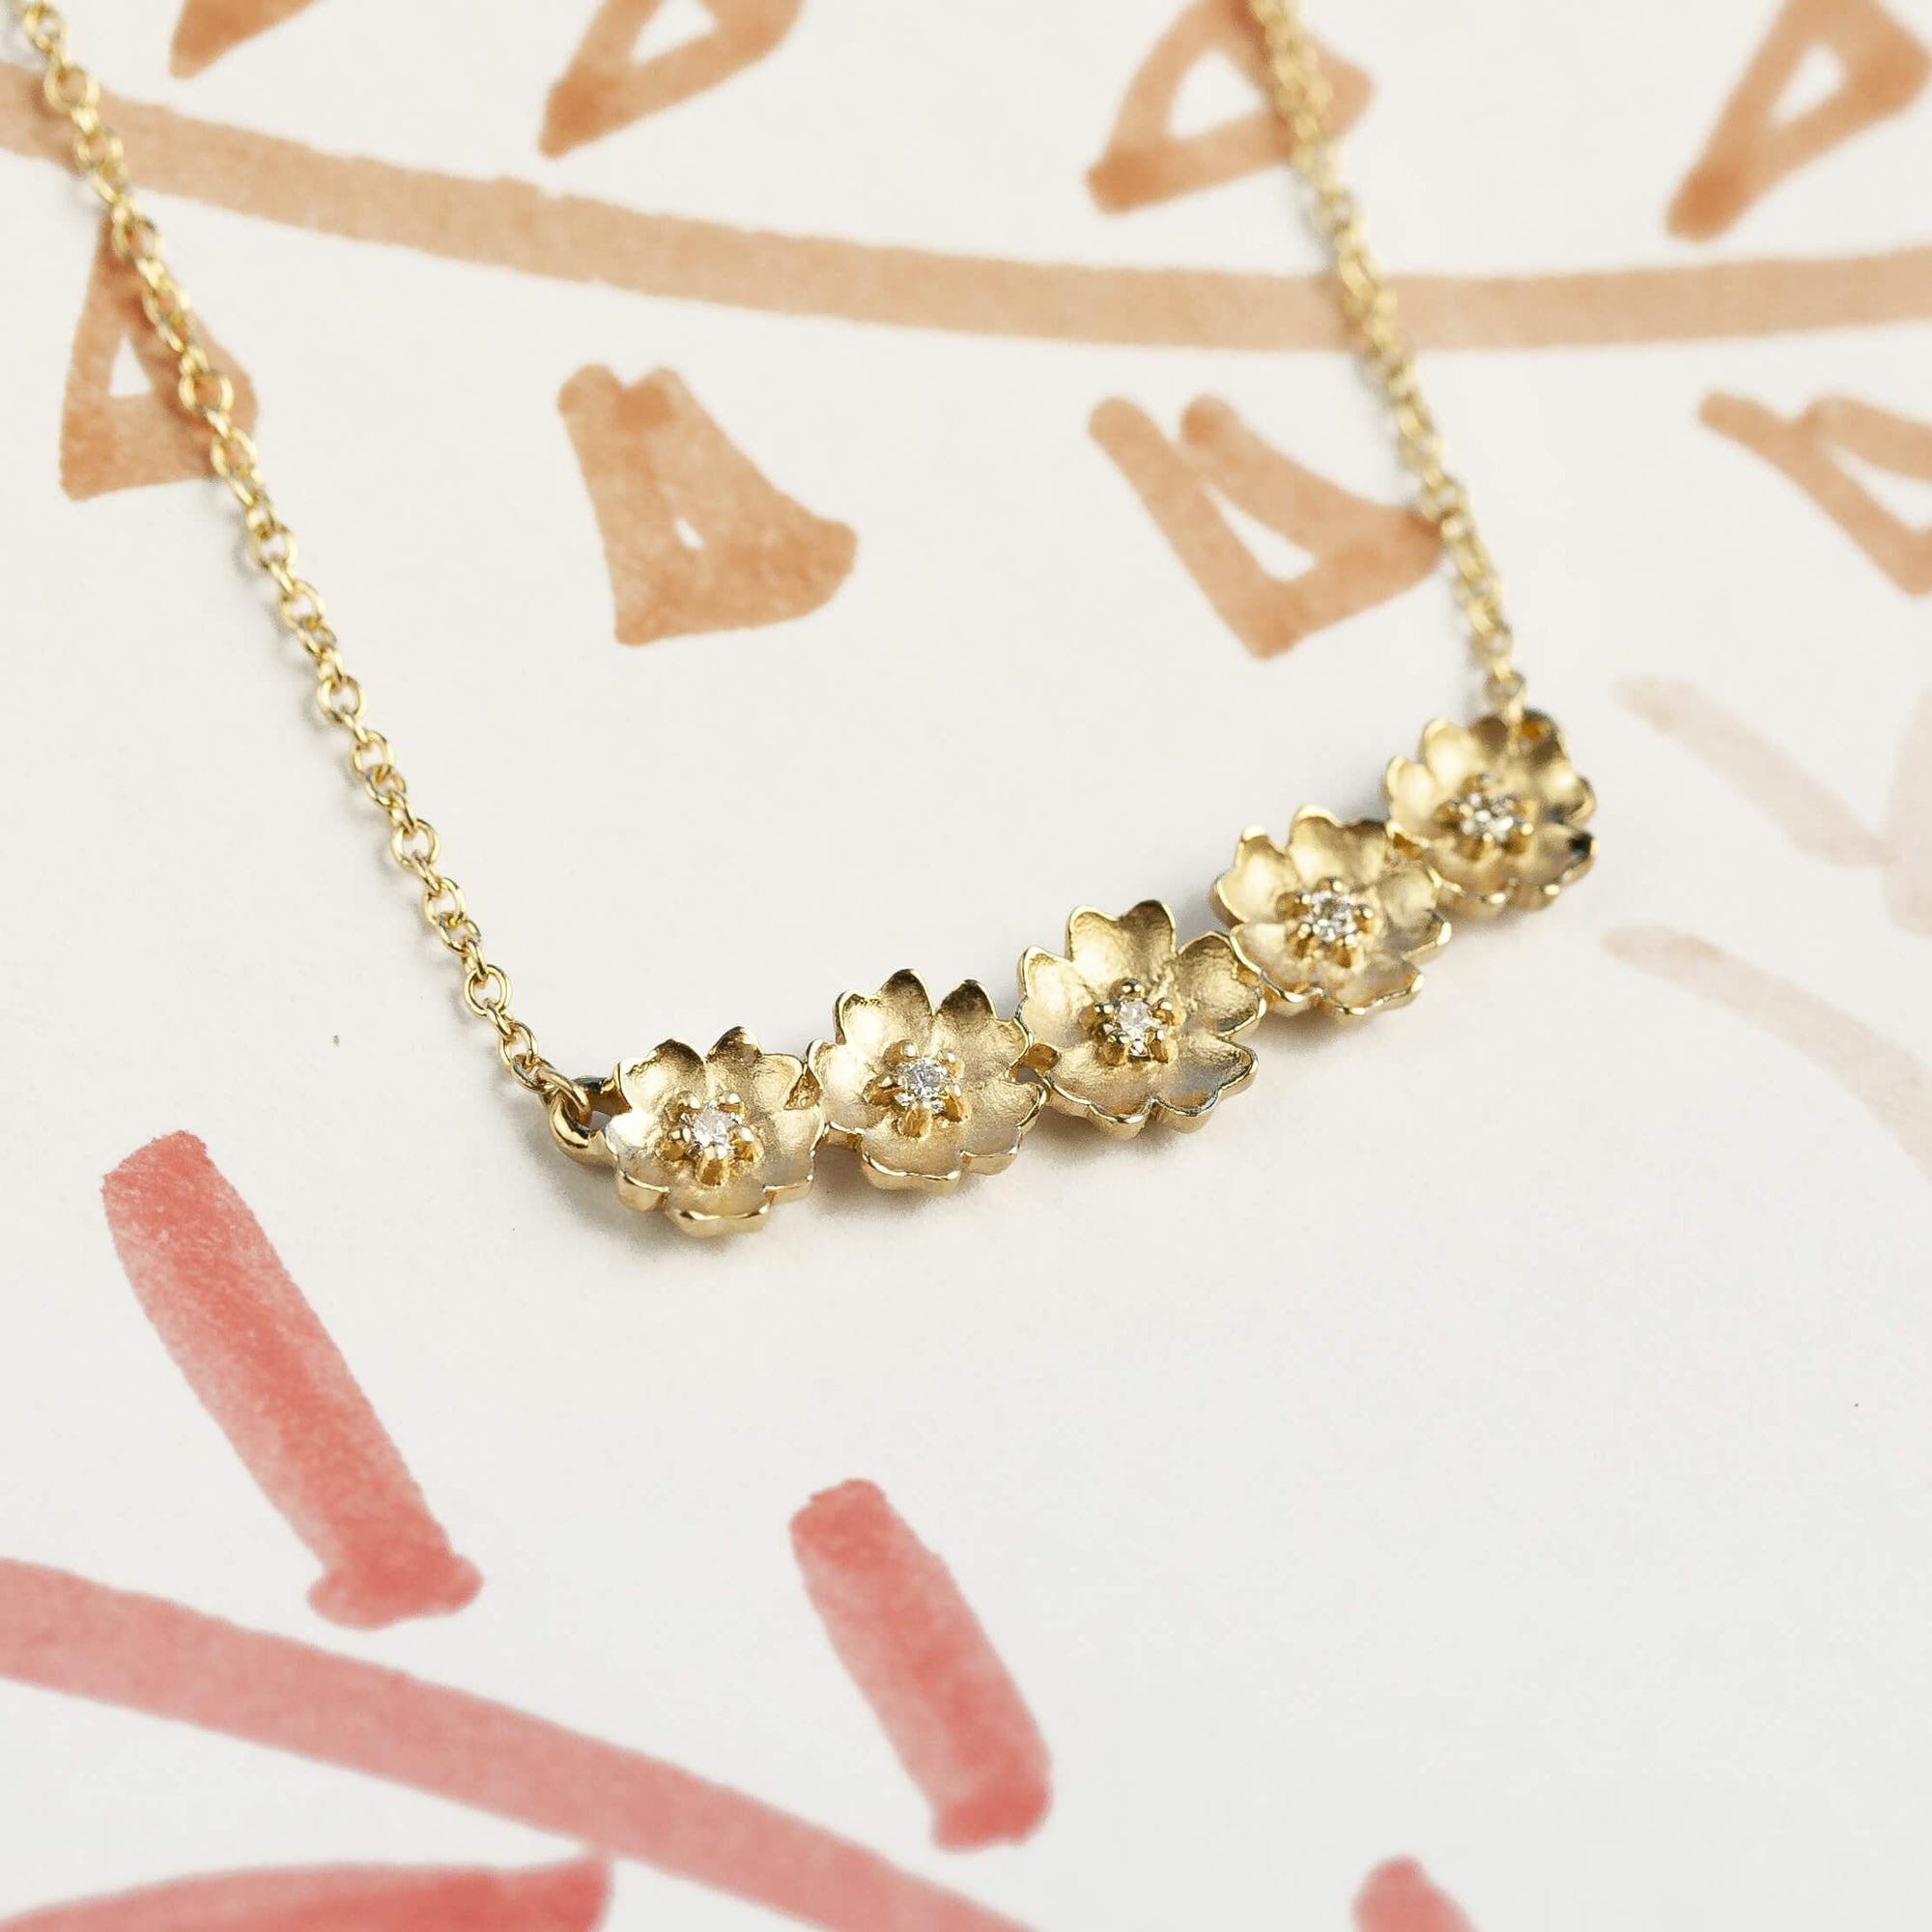 Handmade floral necklace with five Buttercup flowers with diamonds in 18K yellow gold by Designer Megan Thorne